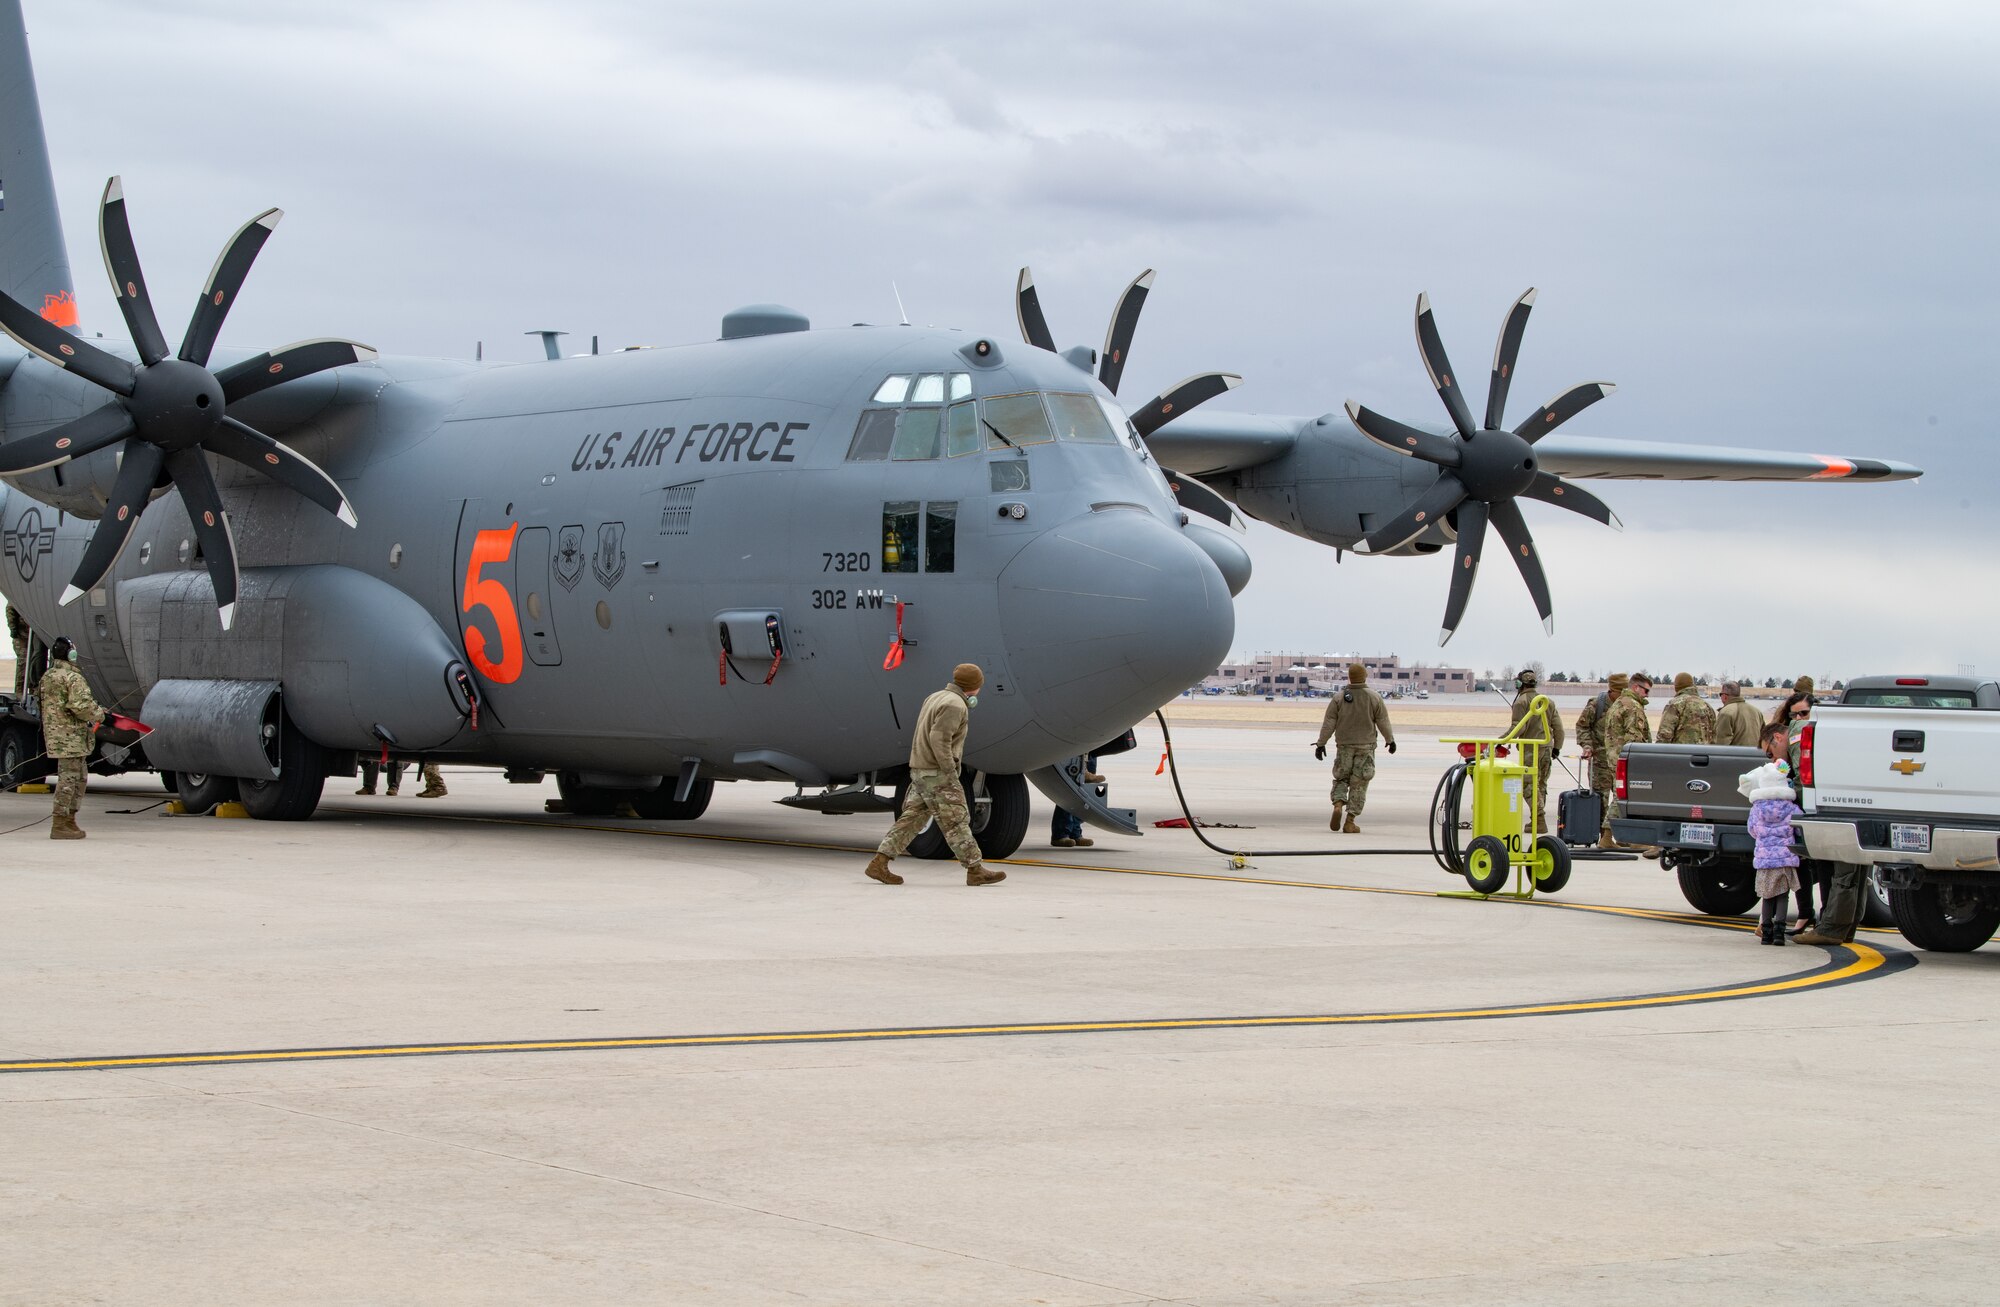 Military cargo plane with eight bladed props sits on flightline with people in military uniform walking around it